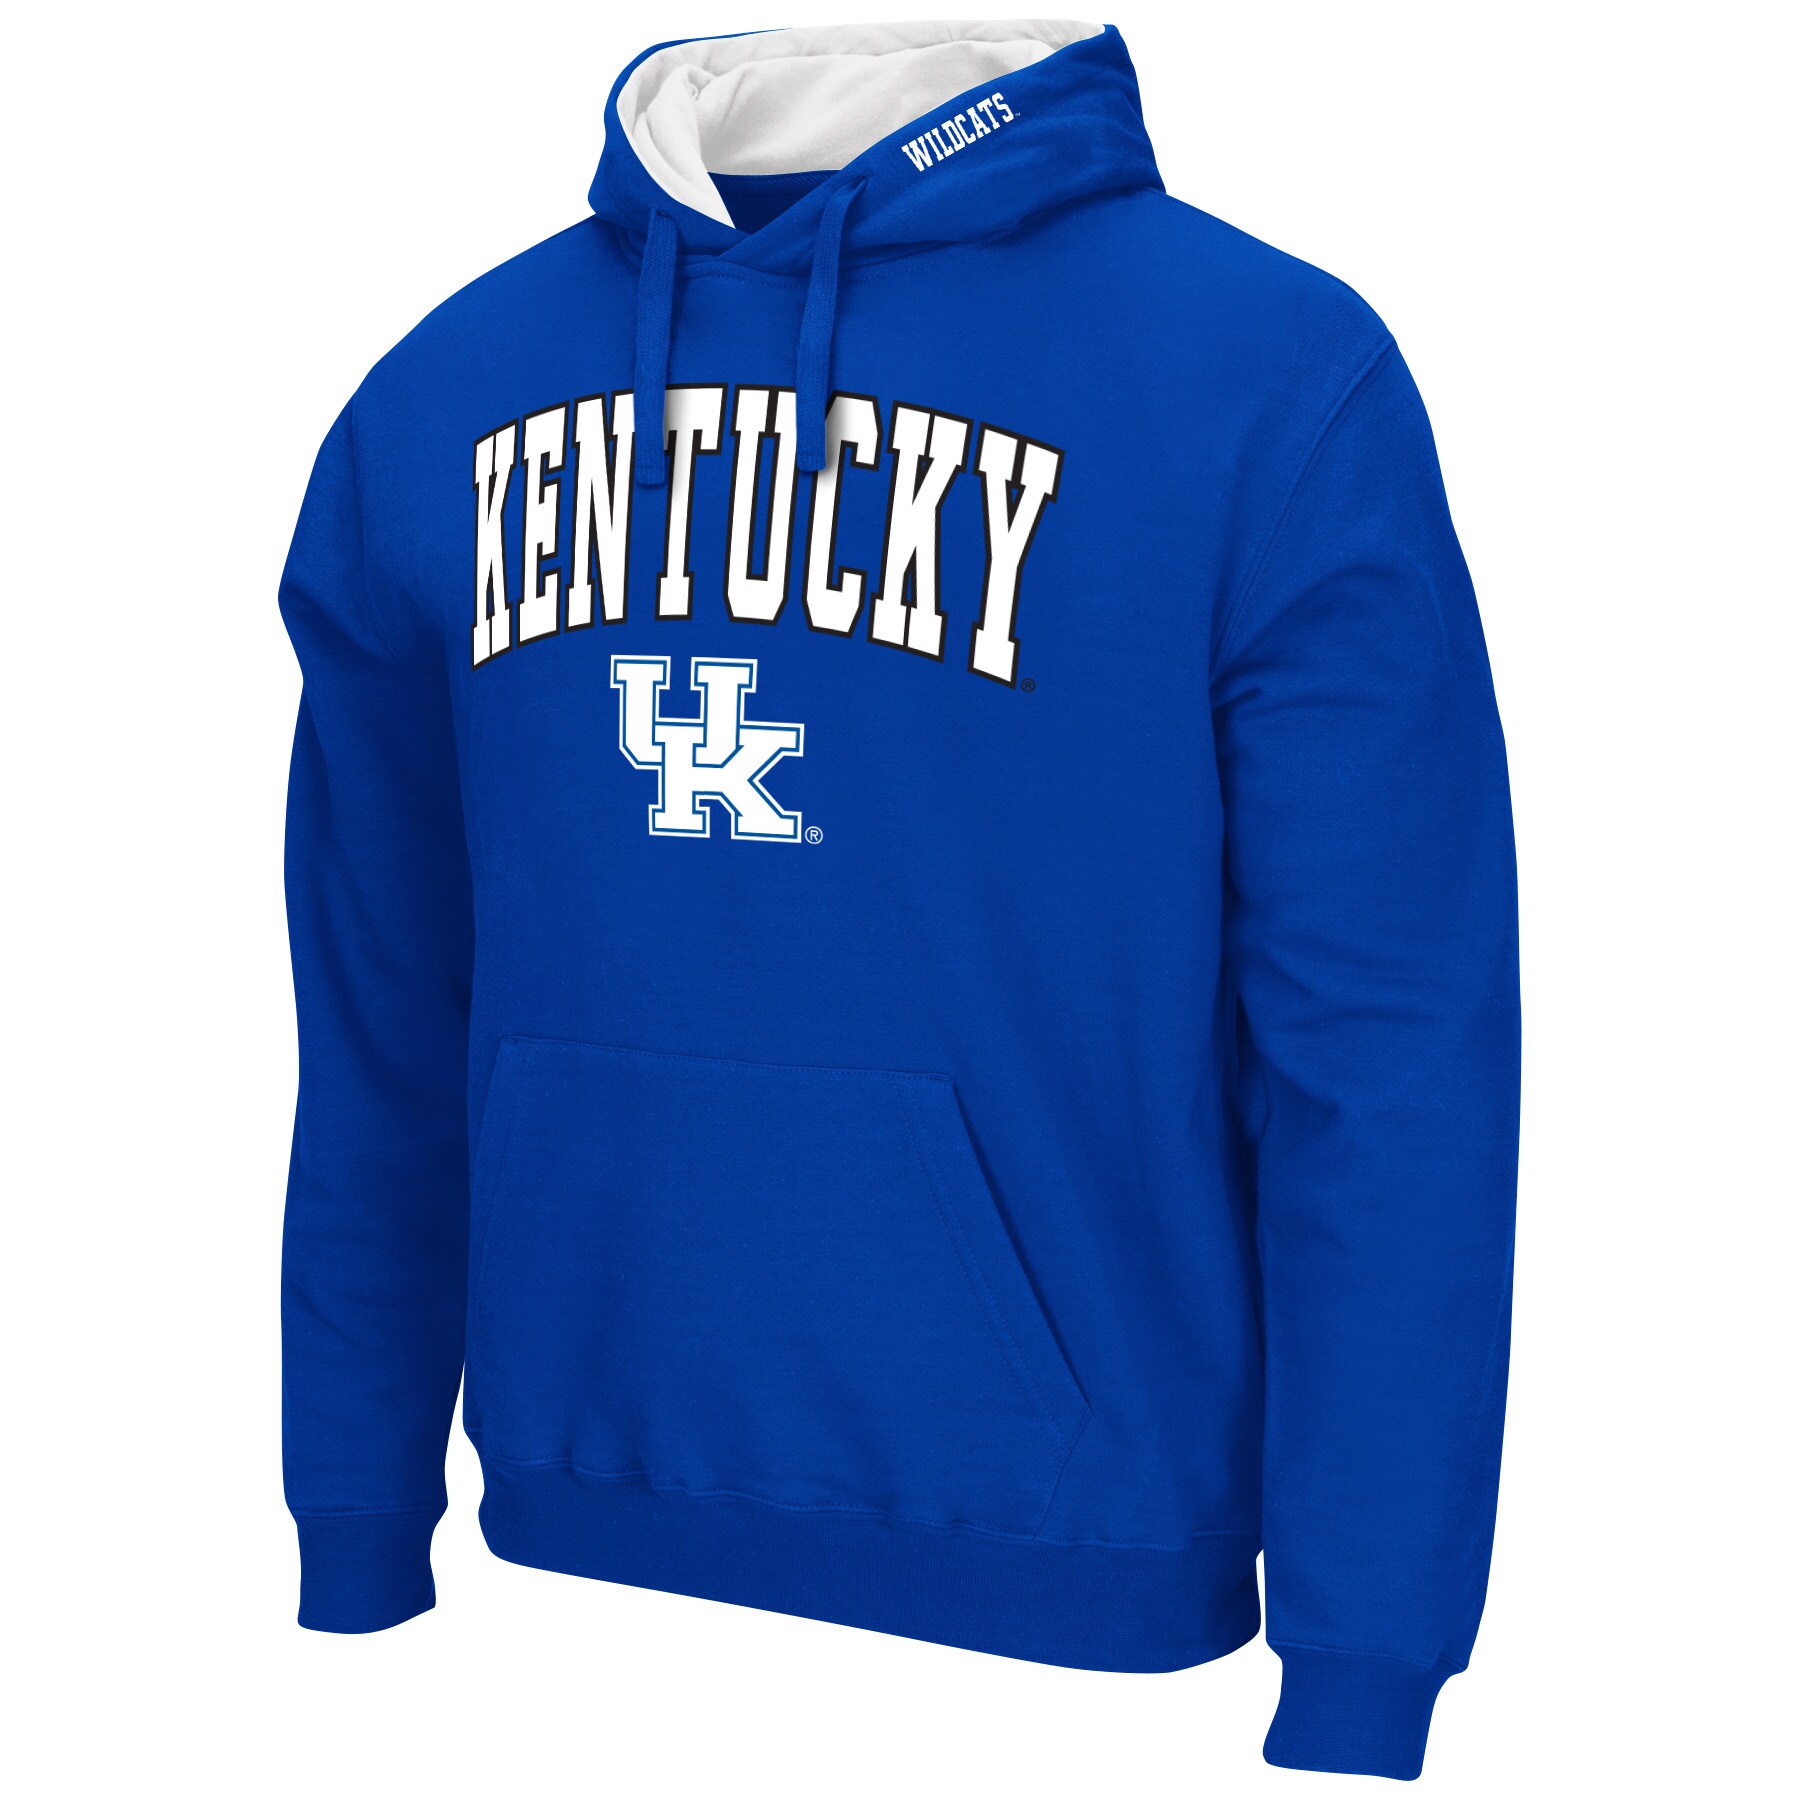 Men's Colosseum Royal Kentucky Wildcats Arch & Logo 3.0 Pullover Hoodie - image 2 of 3